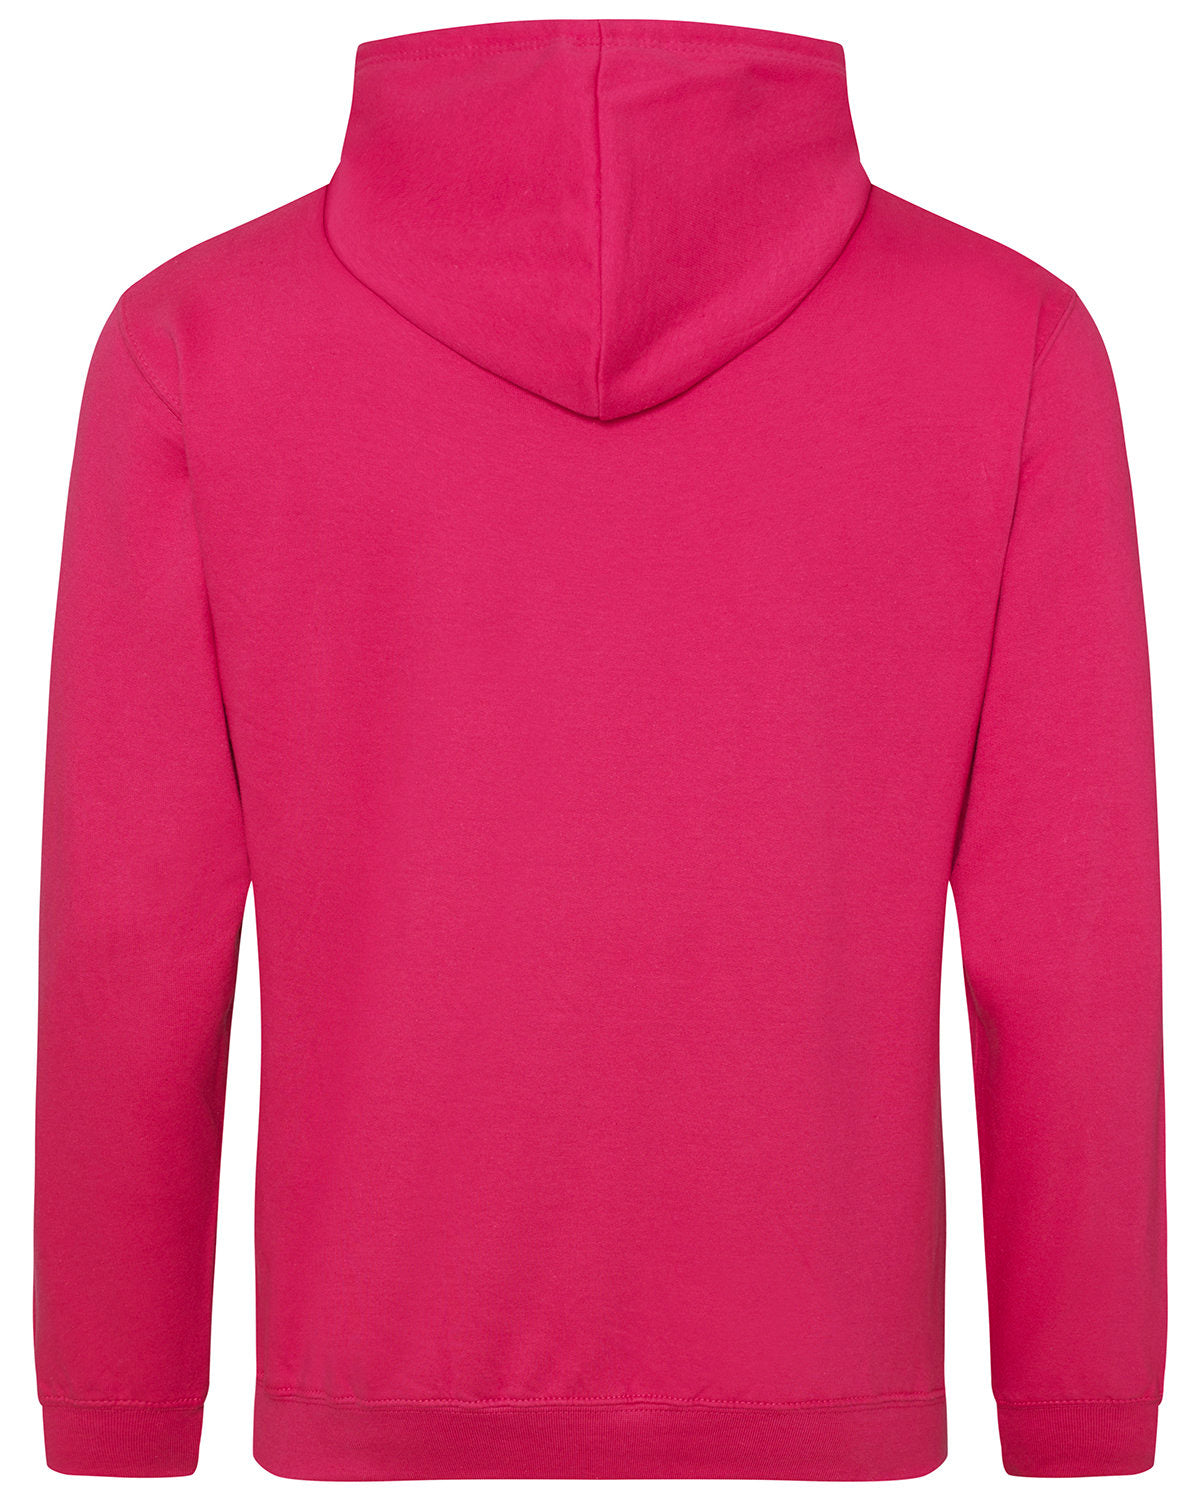 JHA001-Just Hoods By AWDis-HOT PINK